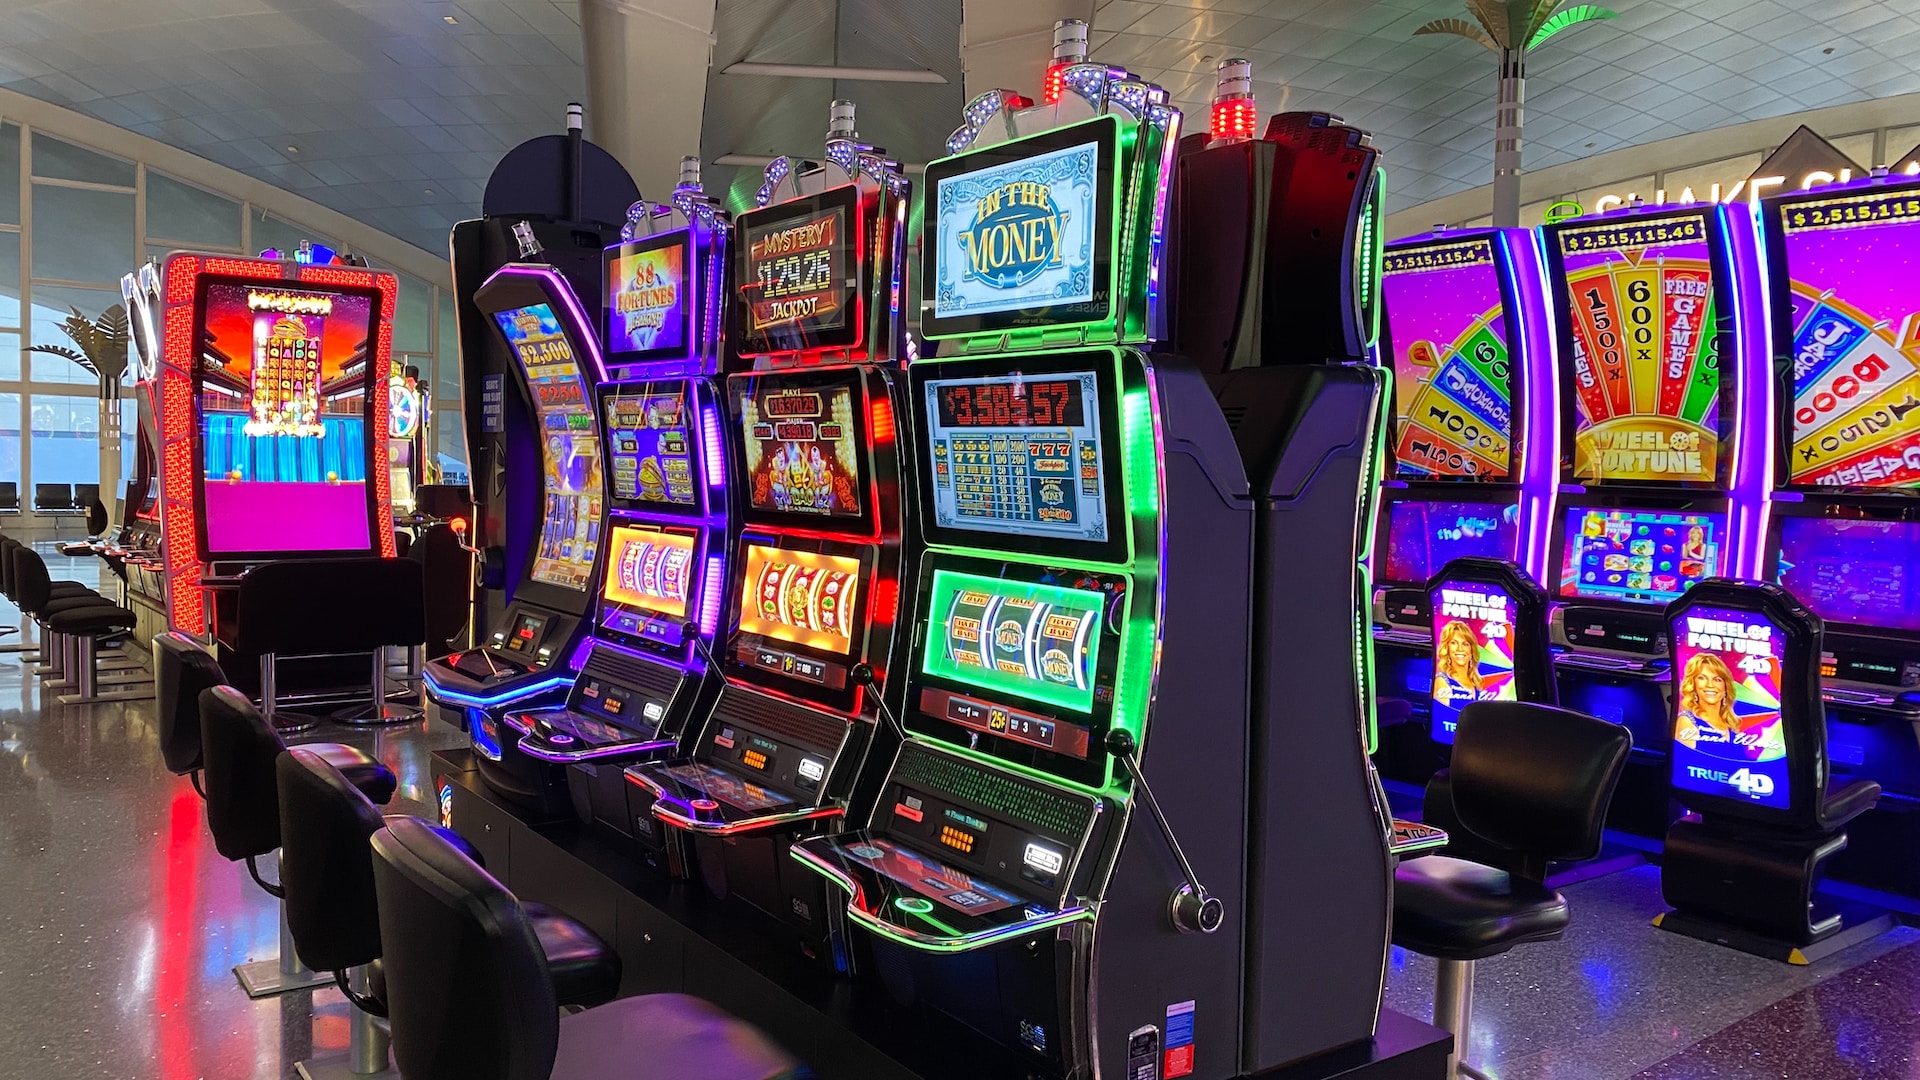 Ensure You Fully Understand The Rules Of The Slots You Play